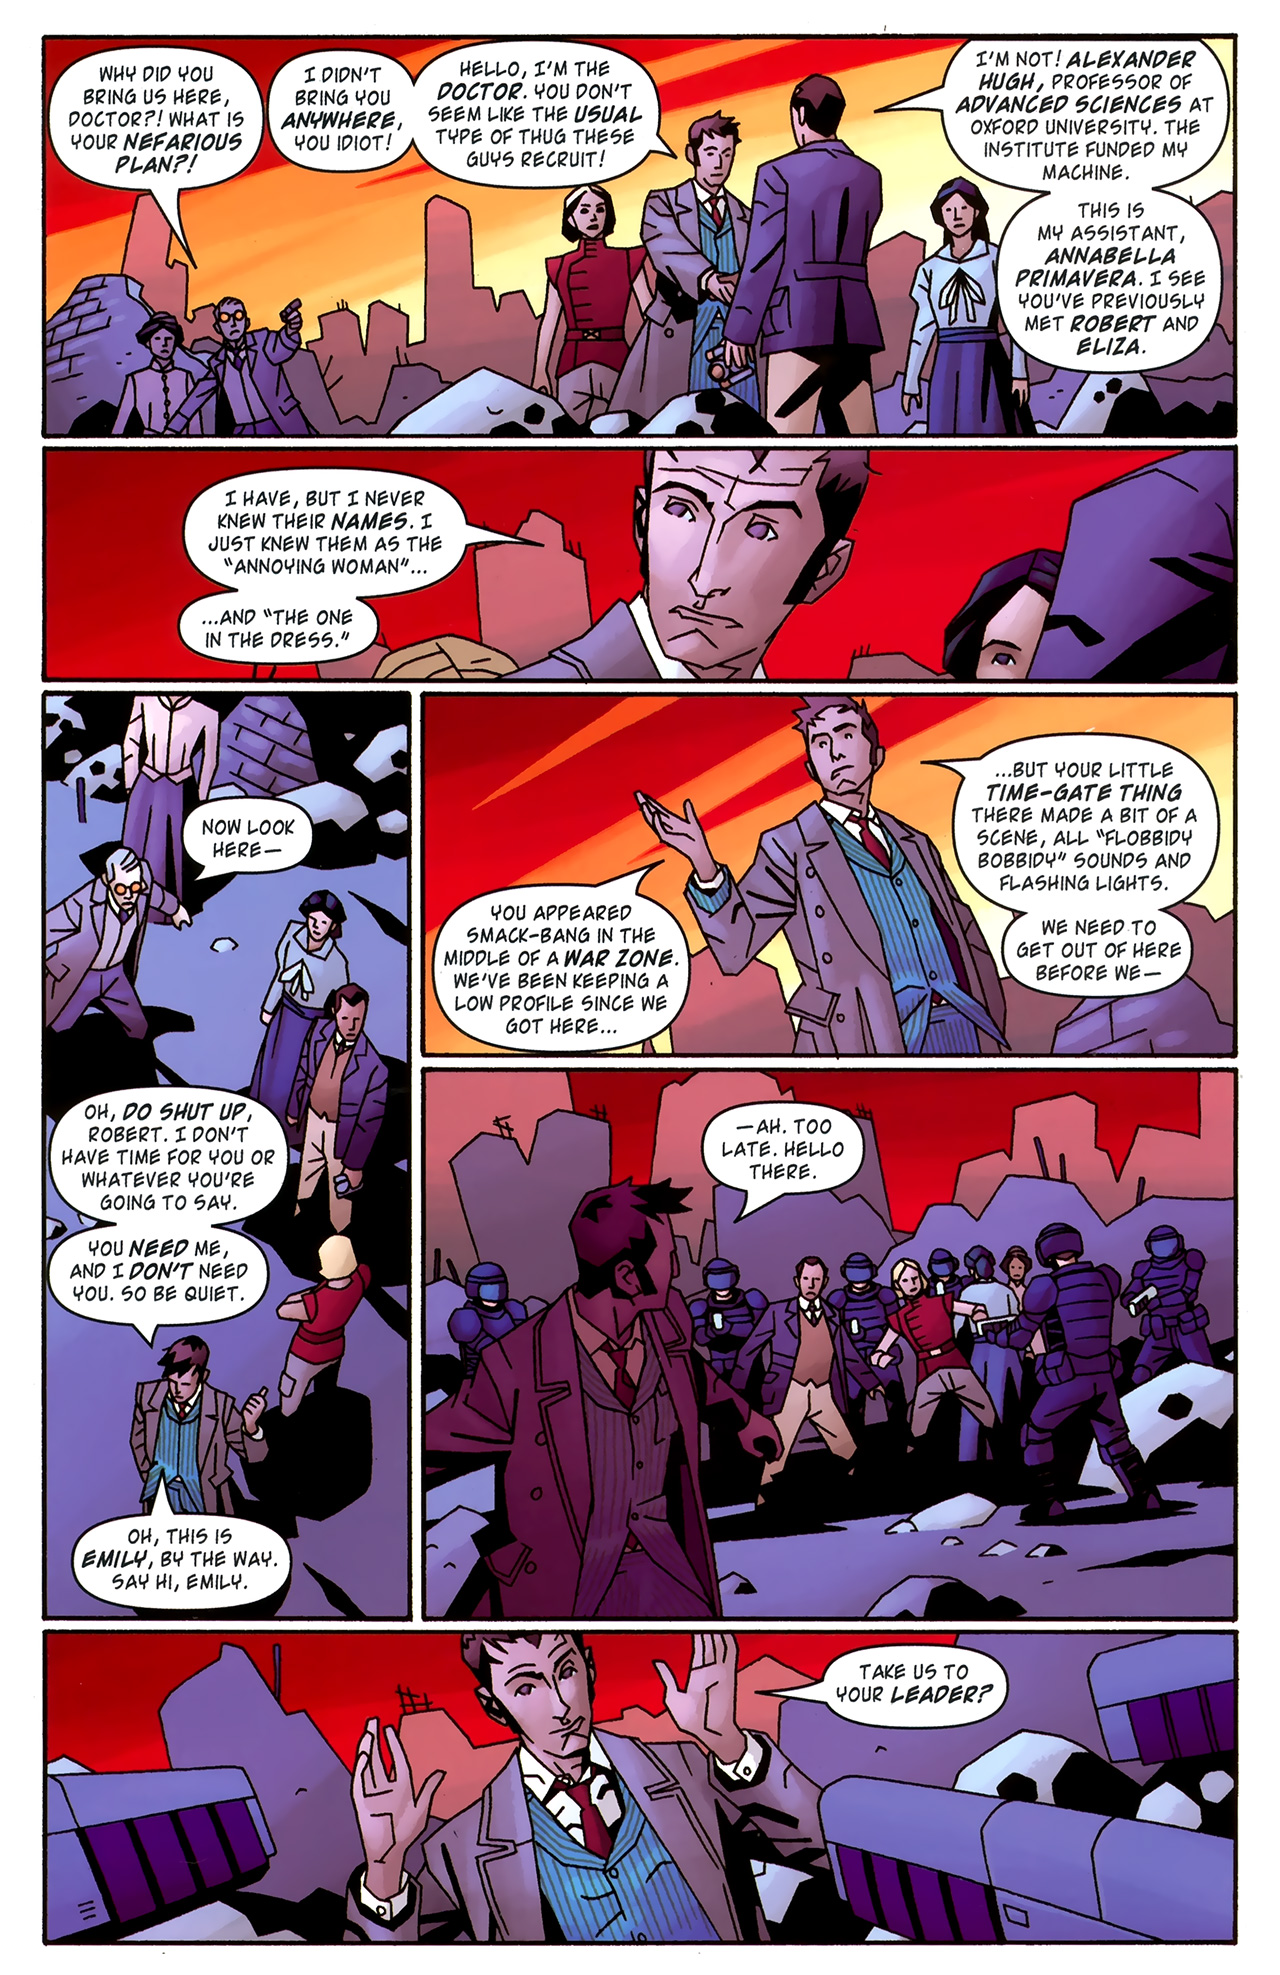 Doctor Who (2009) issue 13 - Page 7